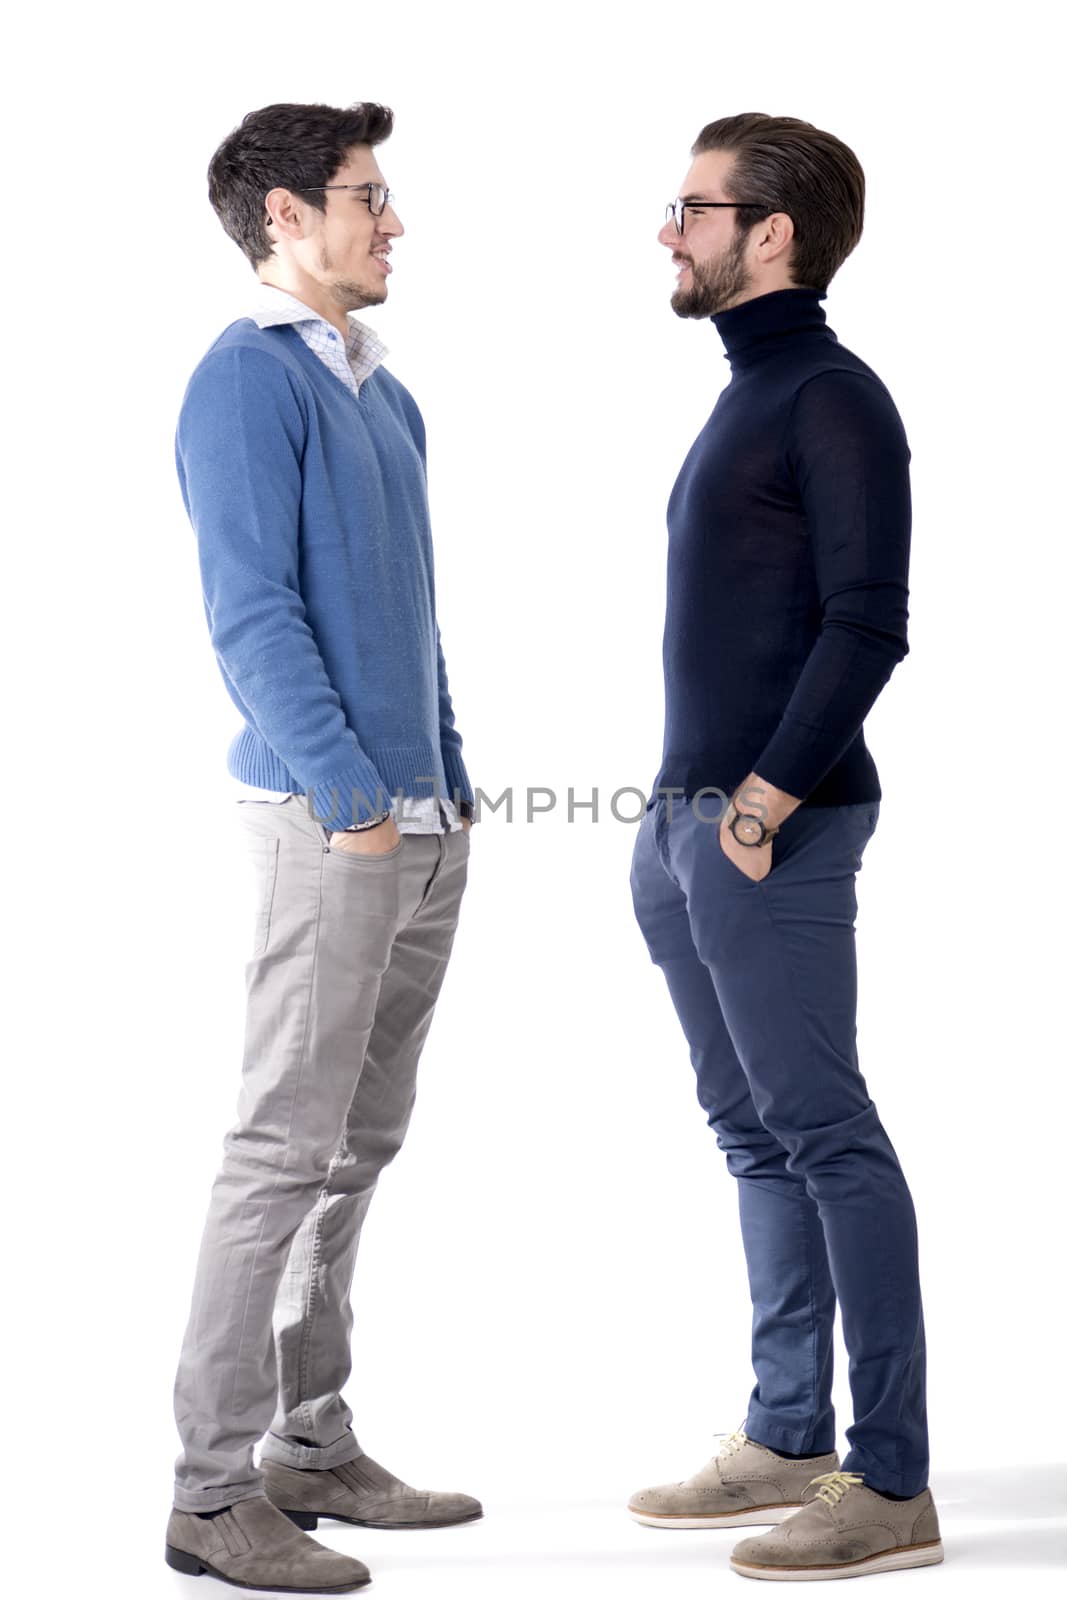 Two good-looking young men with eye-glasses in stylish clothes, looking at one another smiling. Full figure studio shot, isolated on white